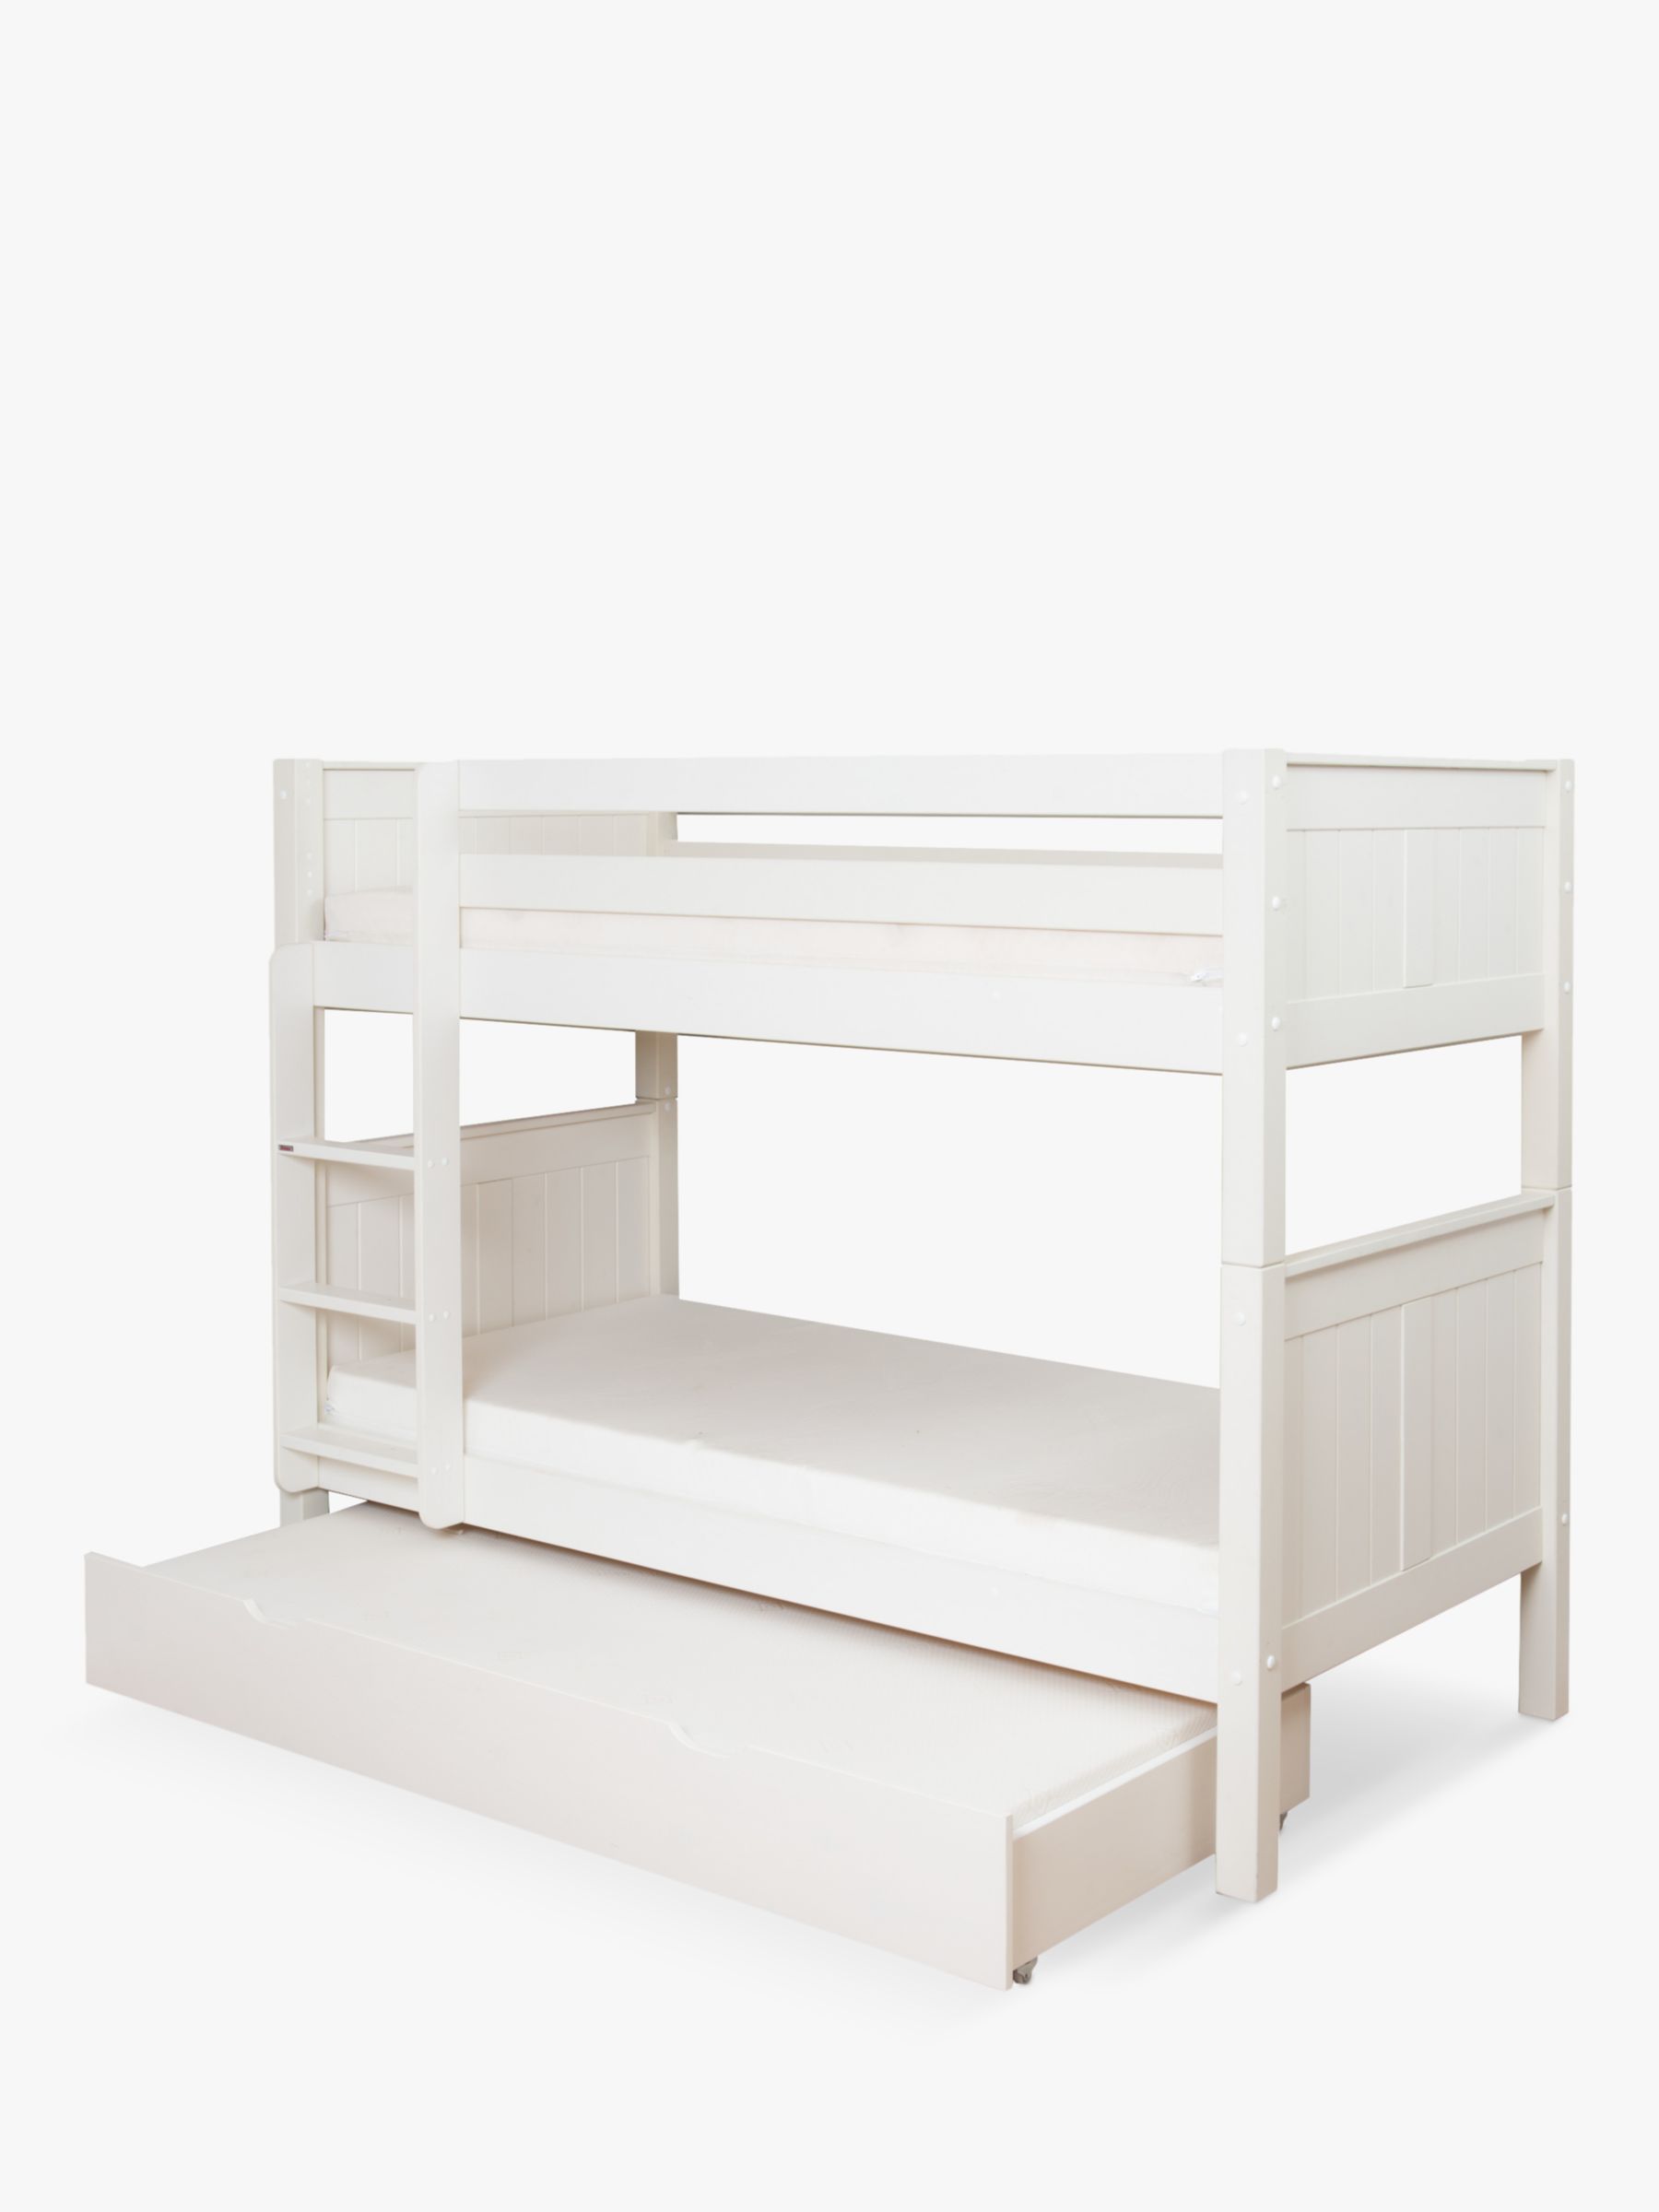 Stompa Classic Child Compliant Bunk Bed, Bunk Beds With Mattress Included